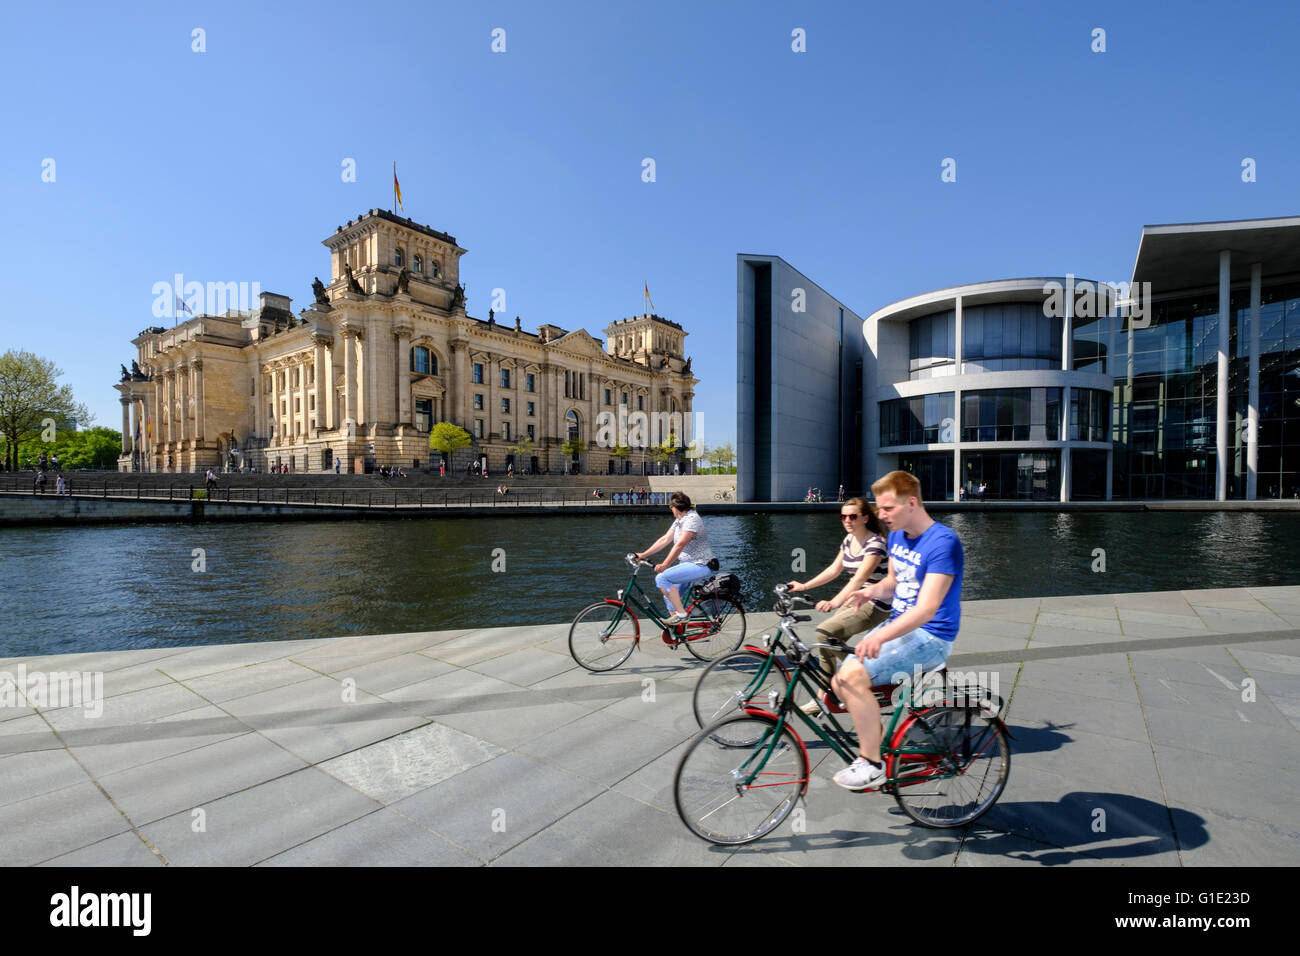 View of the Reichstag Parliament building and tourists on bicycles beside  River Spree in Berlin Germany Stock Photo